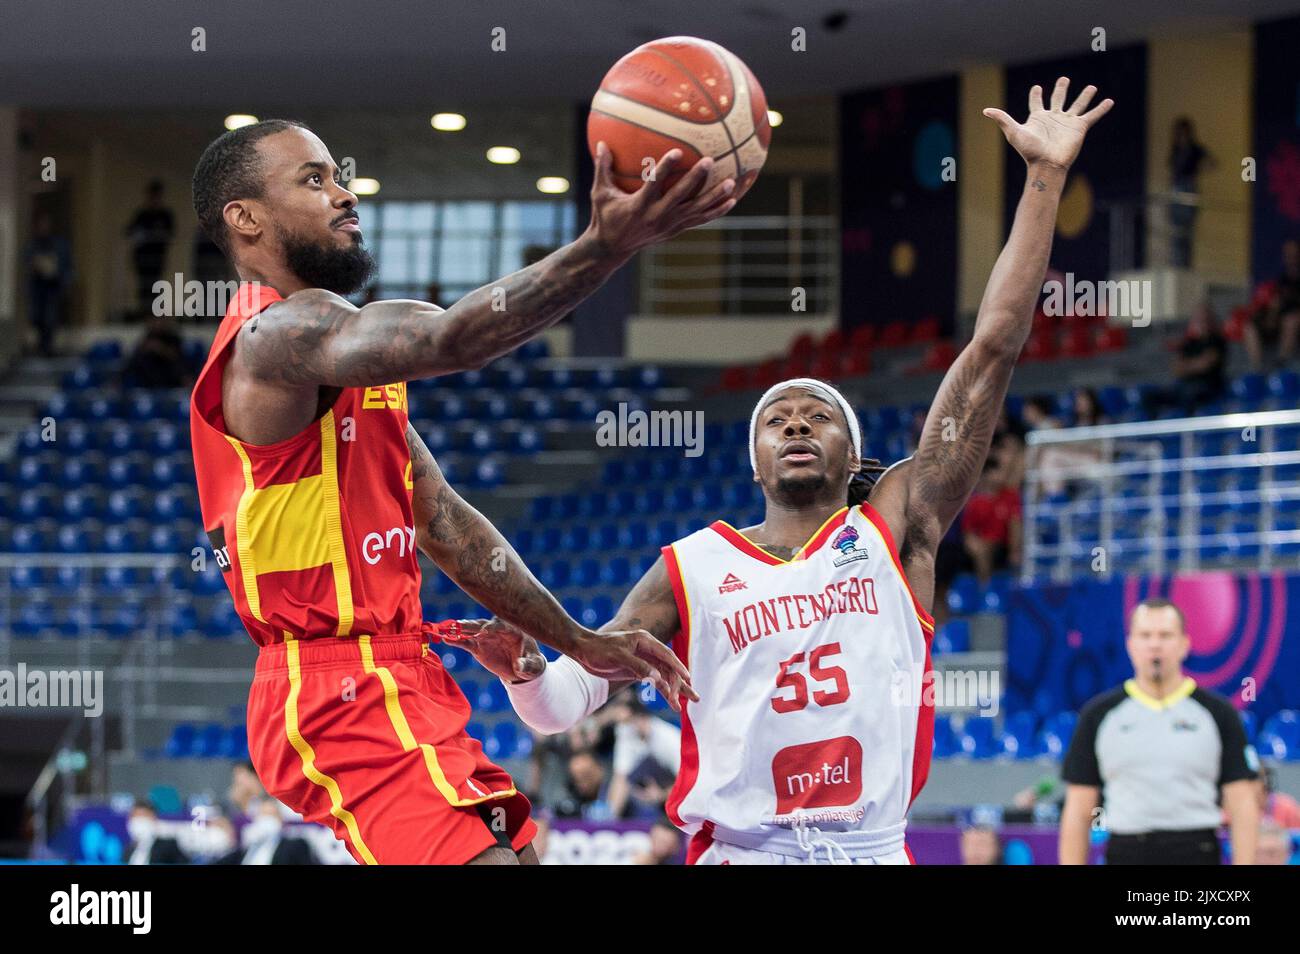 Tbilisi, Georgia, 6th September 2022. Kendrick Dennard Perry of Montenegro tries to block Lorenzo D'ontez Brown of Spain during the FIBA EuroBasket 2022 group A match between Montenegro and Spain at Tbilisi Arena in Tbilisi, Georgia. September 6, 2022. Credit: Nikola Krstic/Alamy Stock Photo